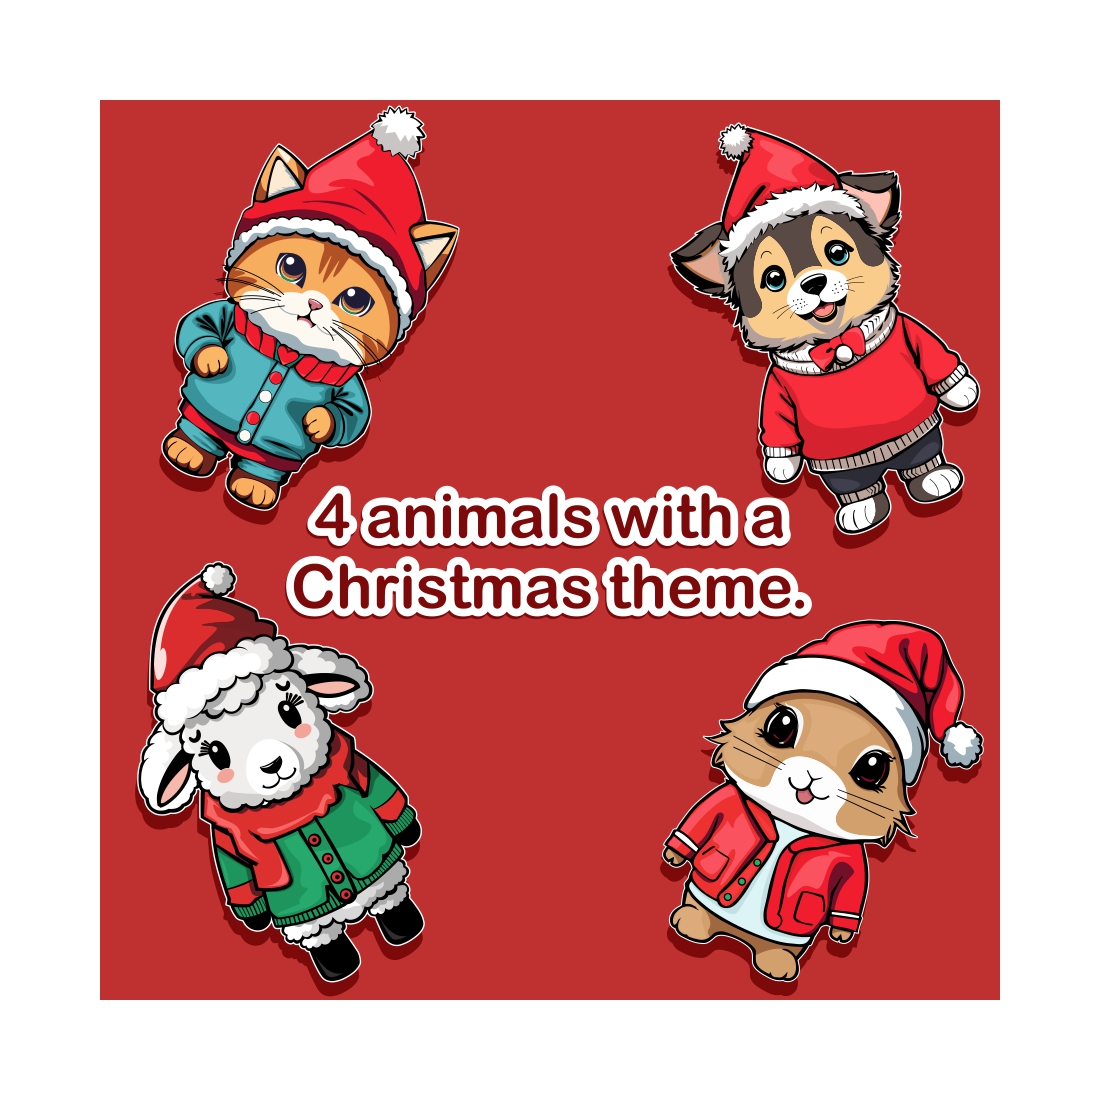 4 cute animal characters with a Christmas theme - only $5 cover image.